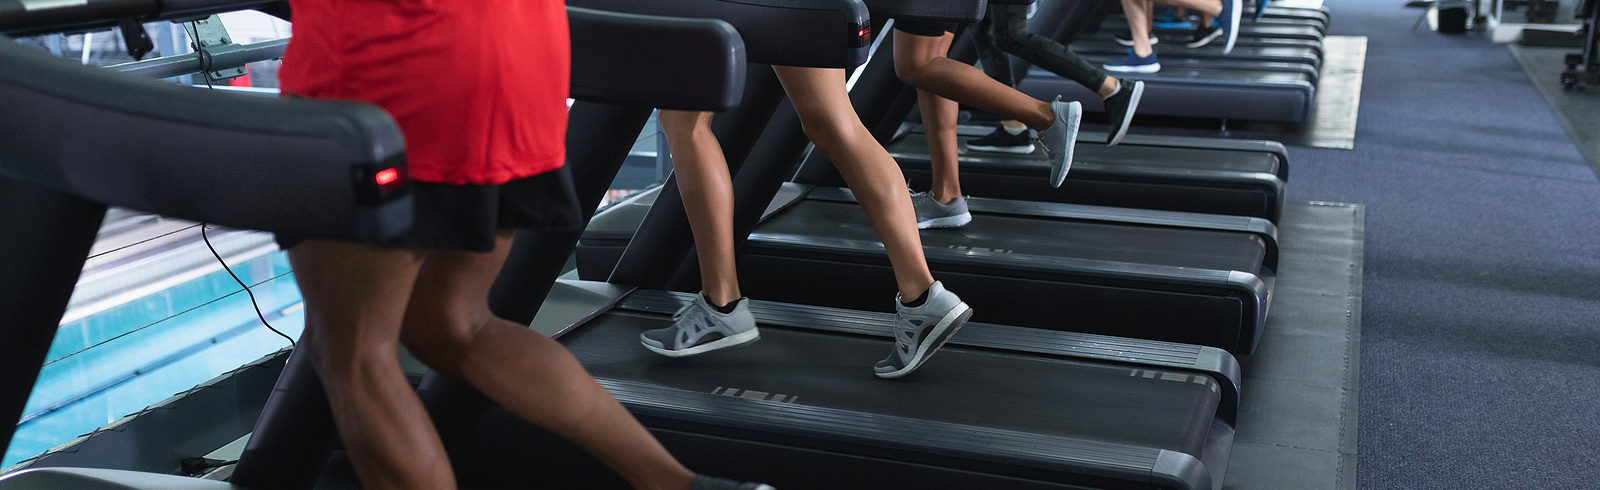 treadmill workout for men and women